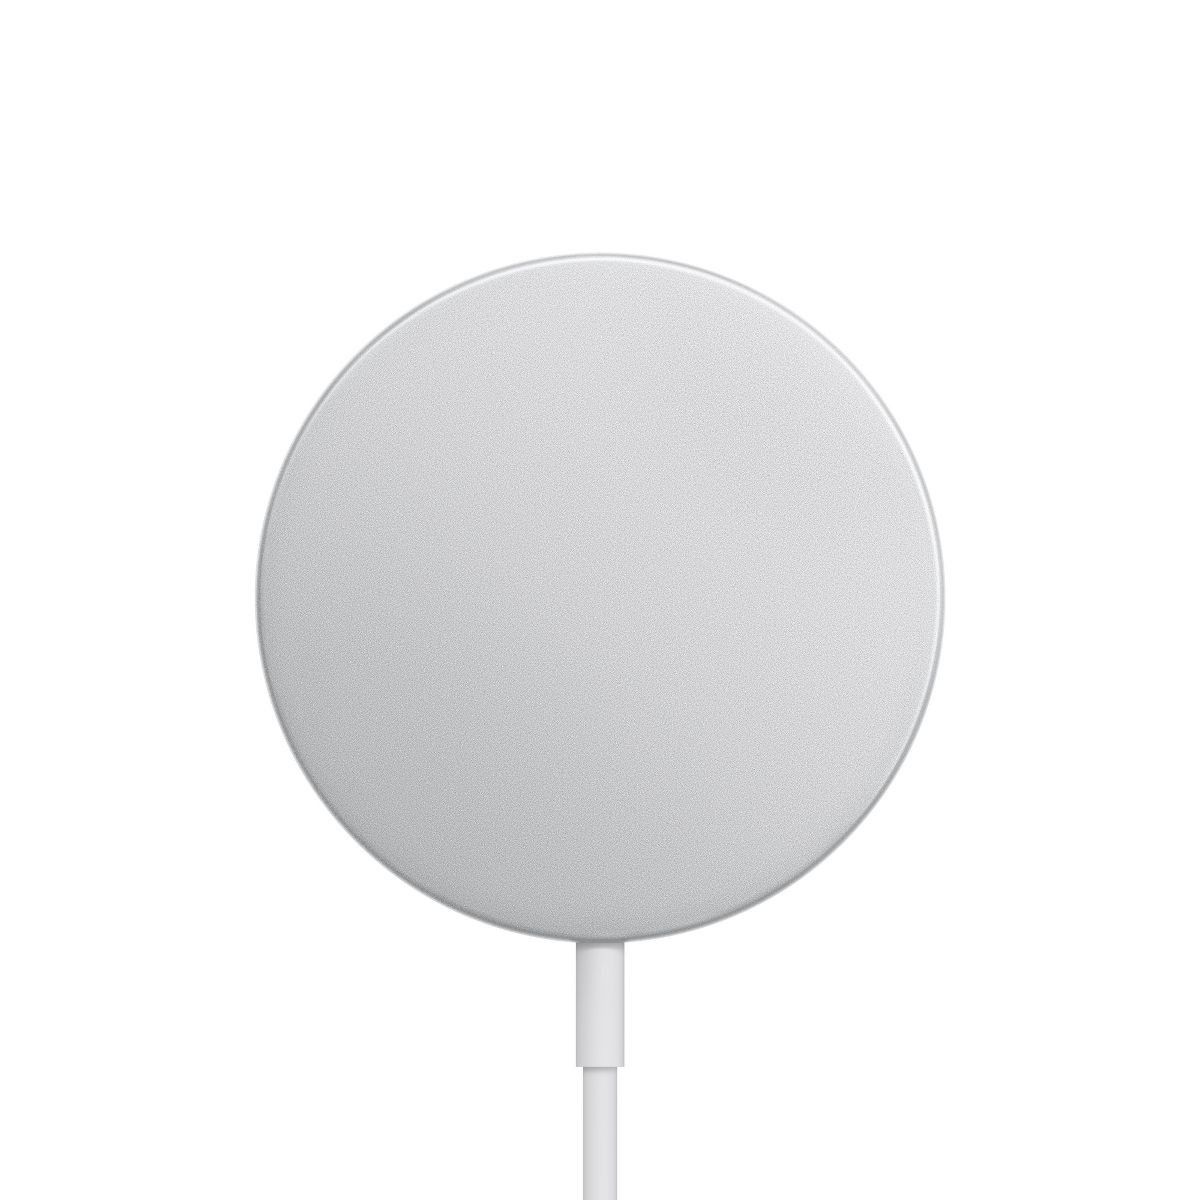 Apple MagSafe Charger | Target